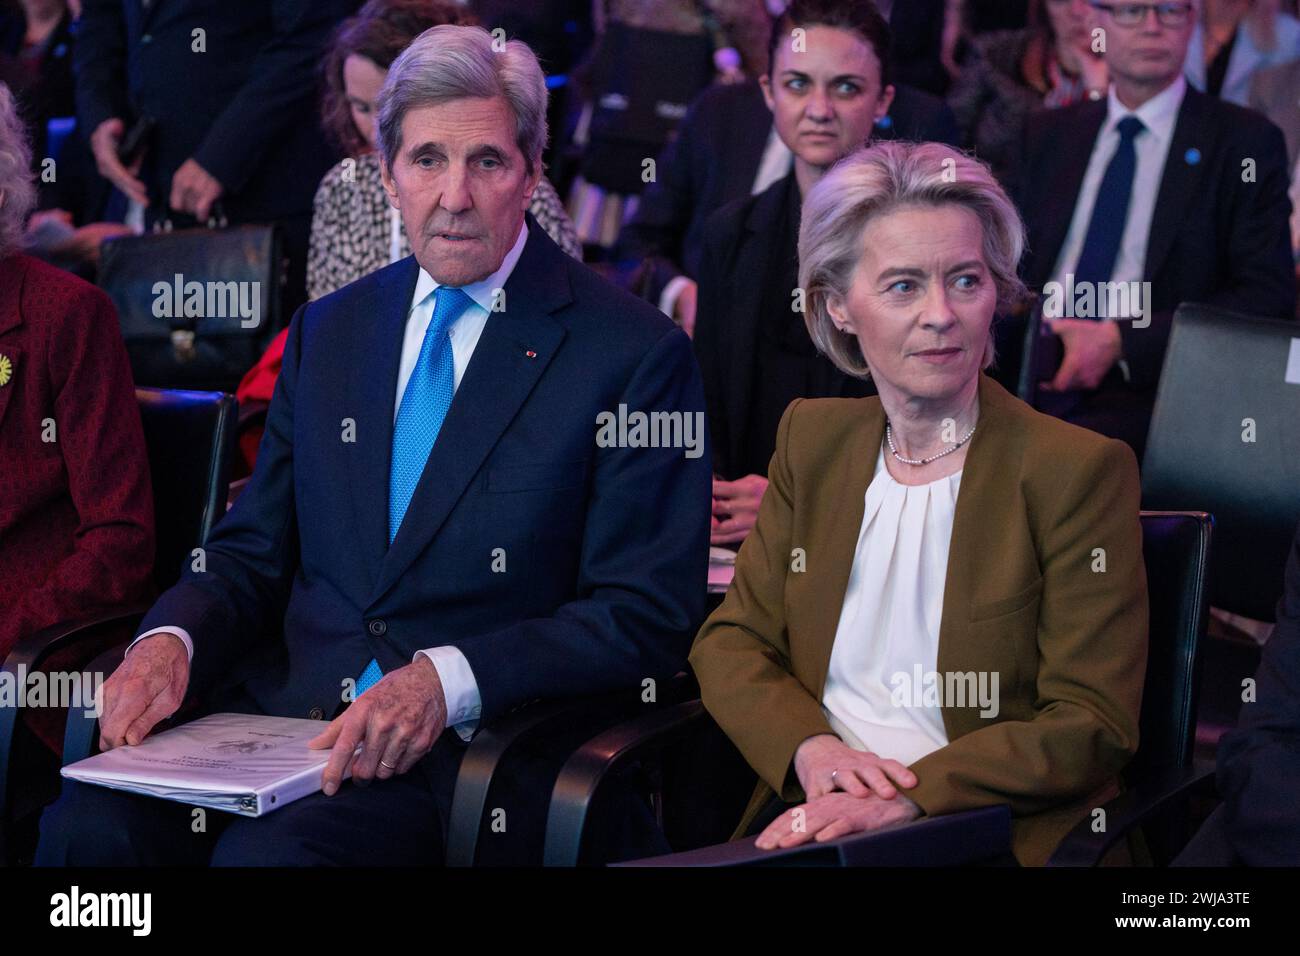 US climate envoy John Kerry and President of the European Commission Ursula von der Leyen attend the International Energy Agency (IEA) 2024 ministerial meeting and 50th Anniversary event, in Paris on February 13, 2024. Energy and climate ministers from around the world will meet in Paris on February 13 and 14 for the IEA's 2024 Ministerial Meeting to take stock of the latest developments in energy markets, policies and transitions, and to set the Agency's strategic direction for the coming years. Photo by Nathan Laine/ABACAPRESS.COM Stock Photo